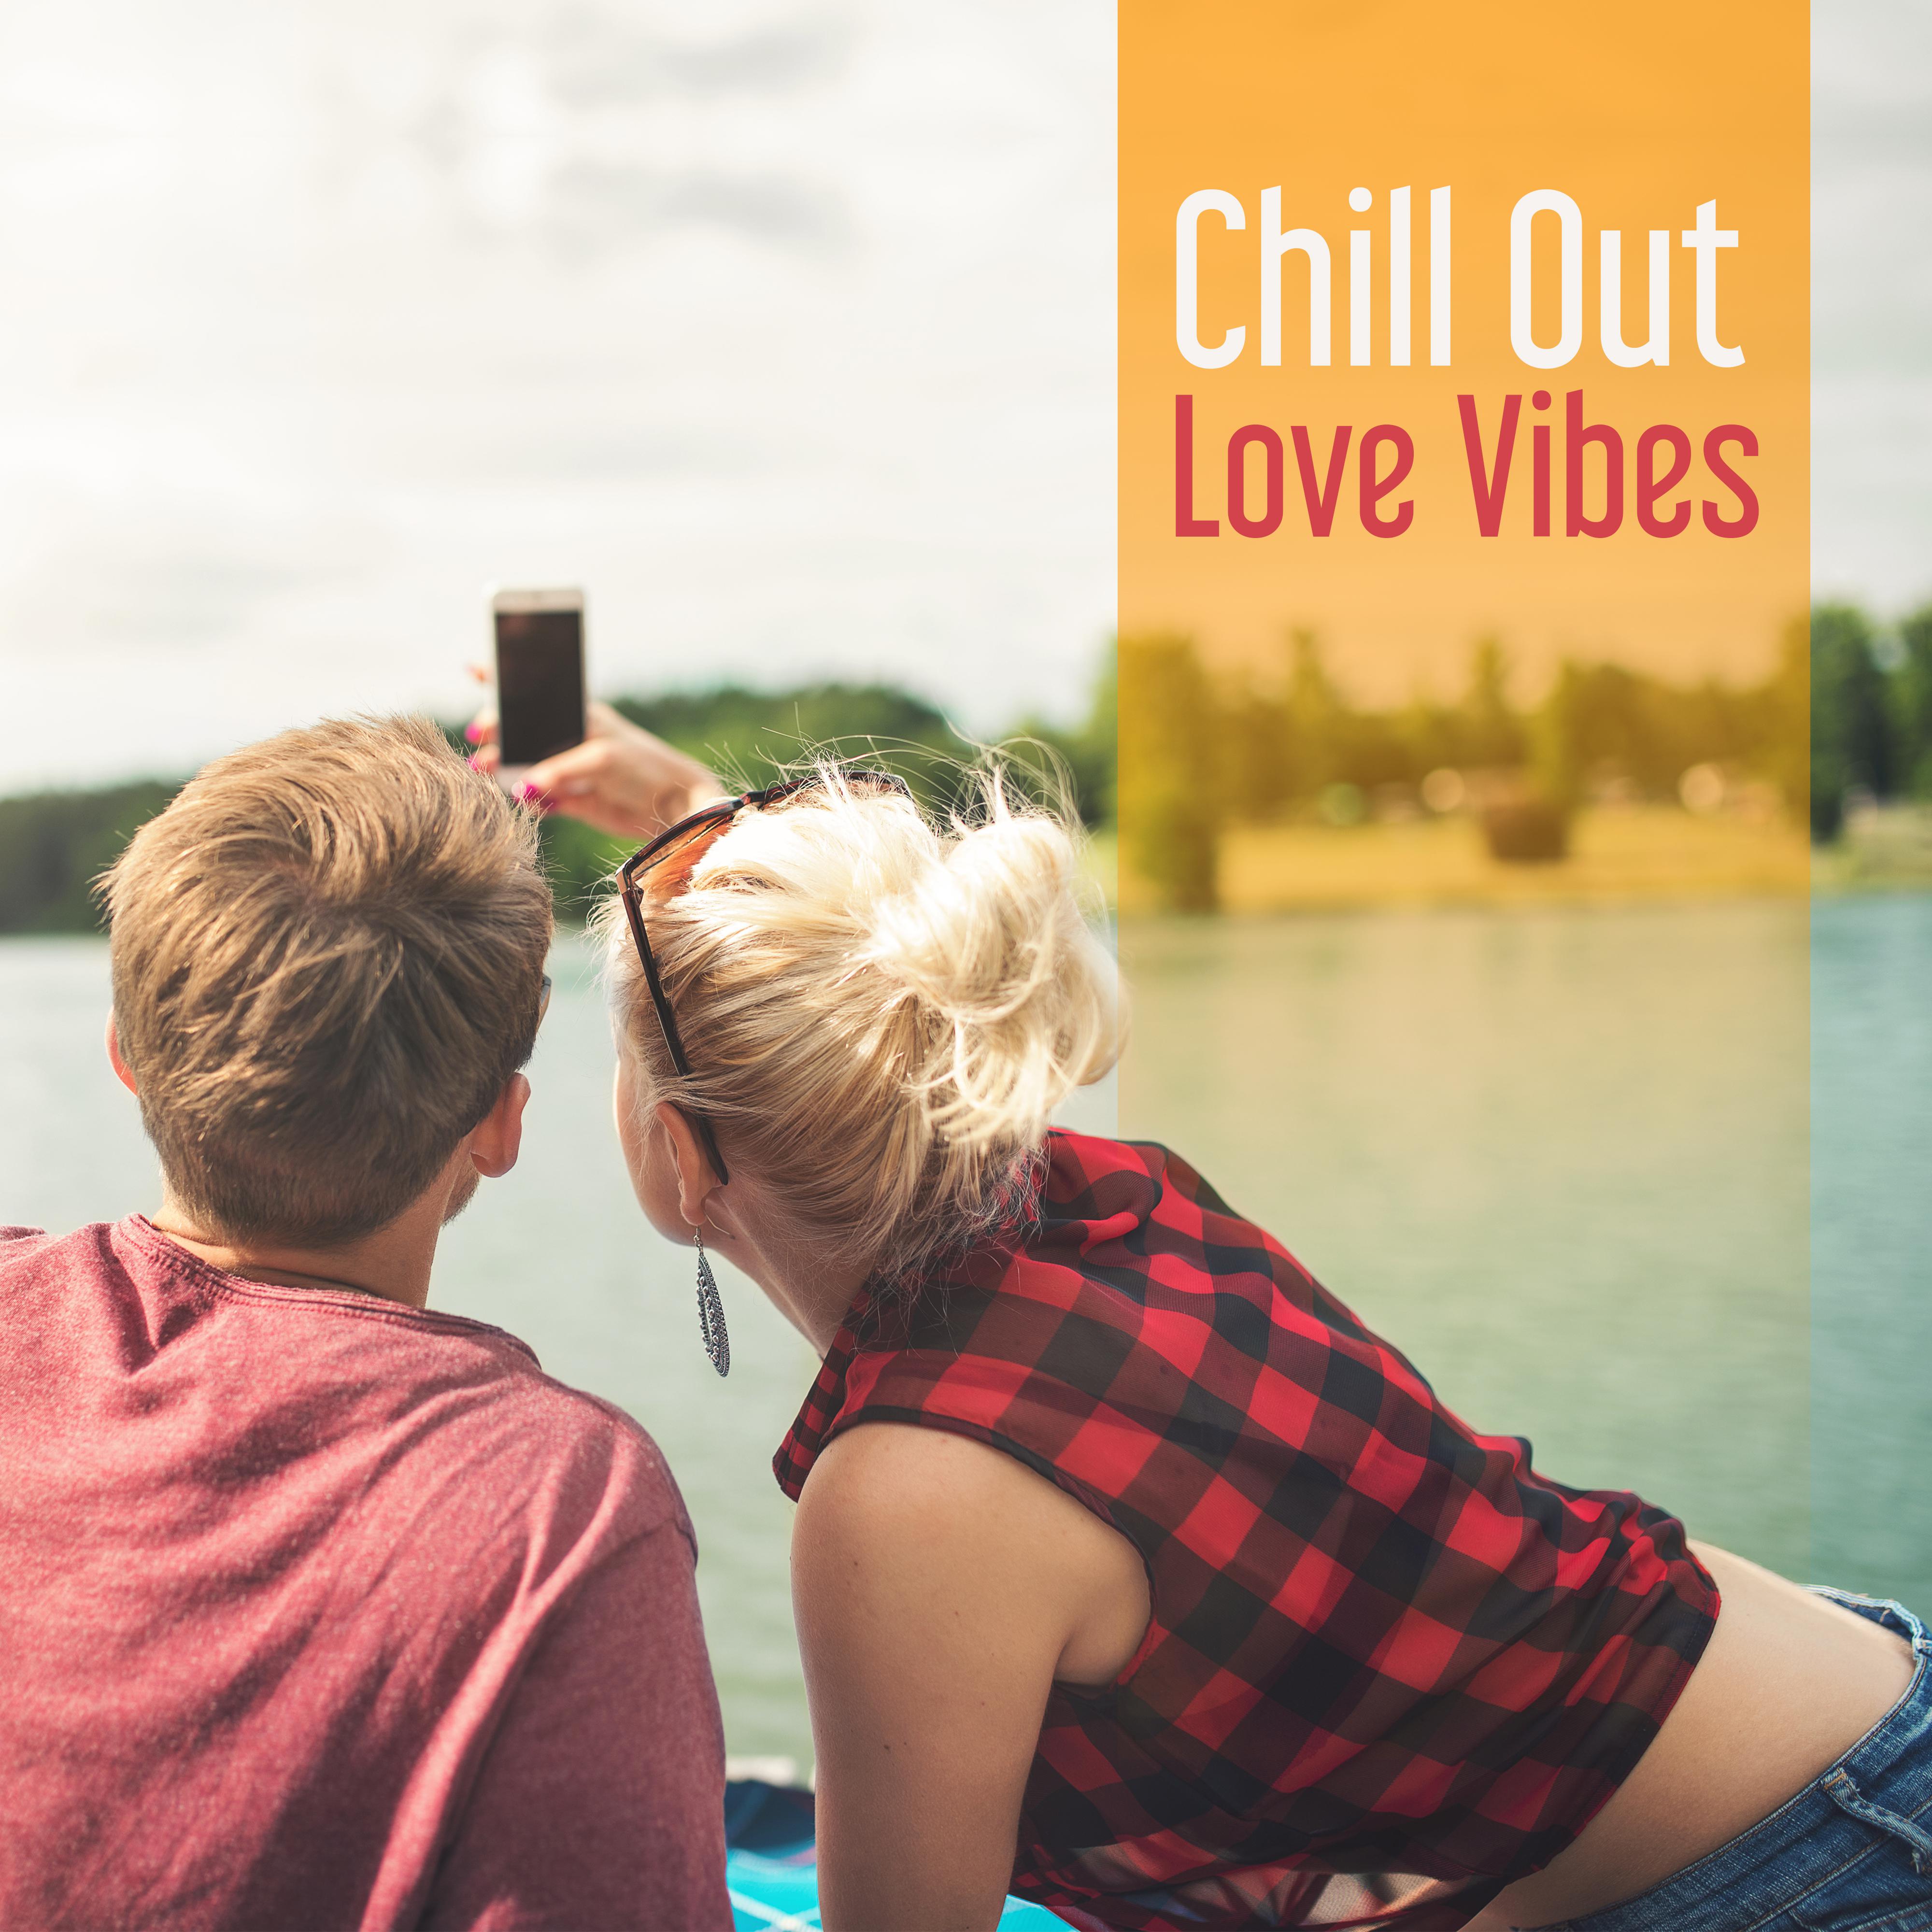 Chill Out Love Vibes  Sexy Dance, Ibiza Party Time, Erotic Beach Music